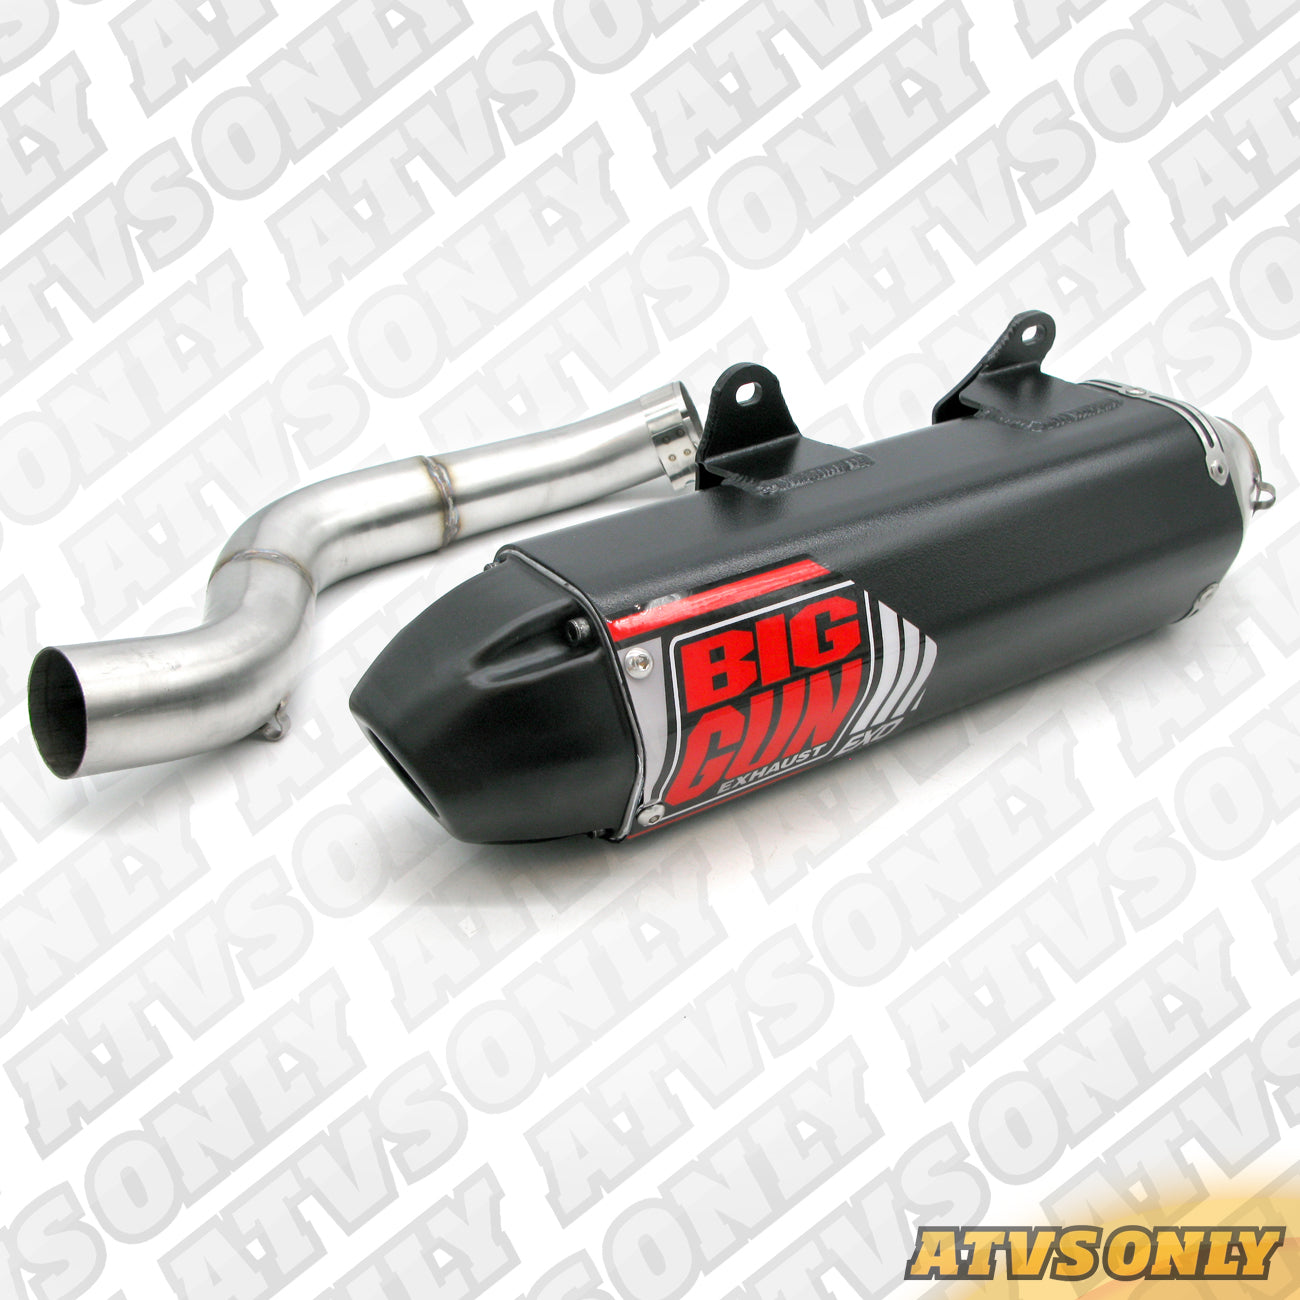 Exhaust – EXO Slip-On Silencer in Black for Suzuki/Yamaha Applications ATVS ONLY EXCLUSIVE